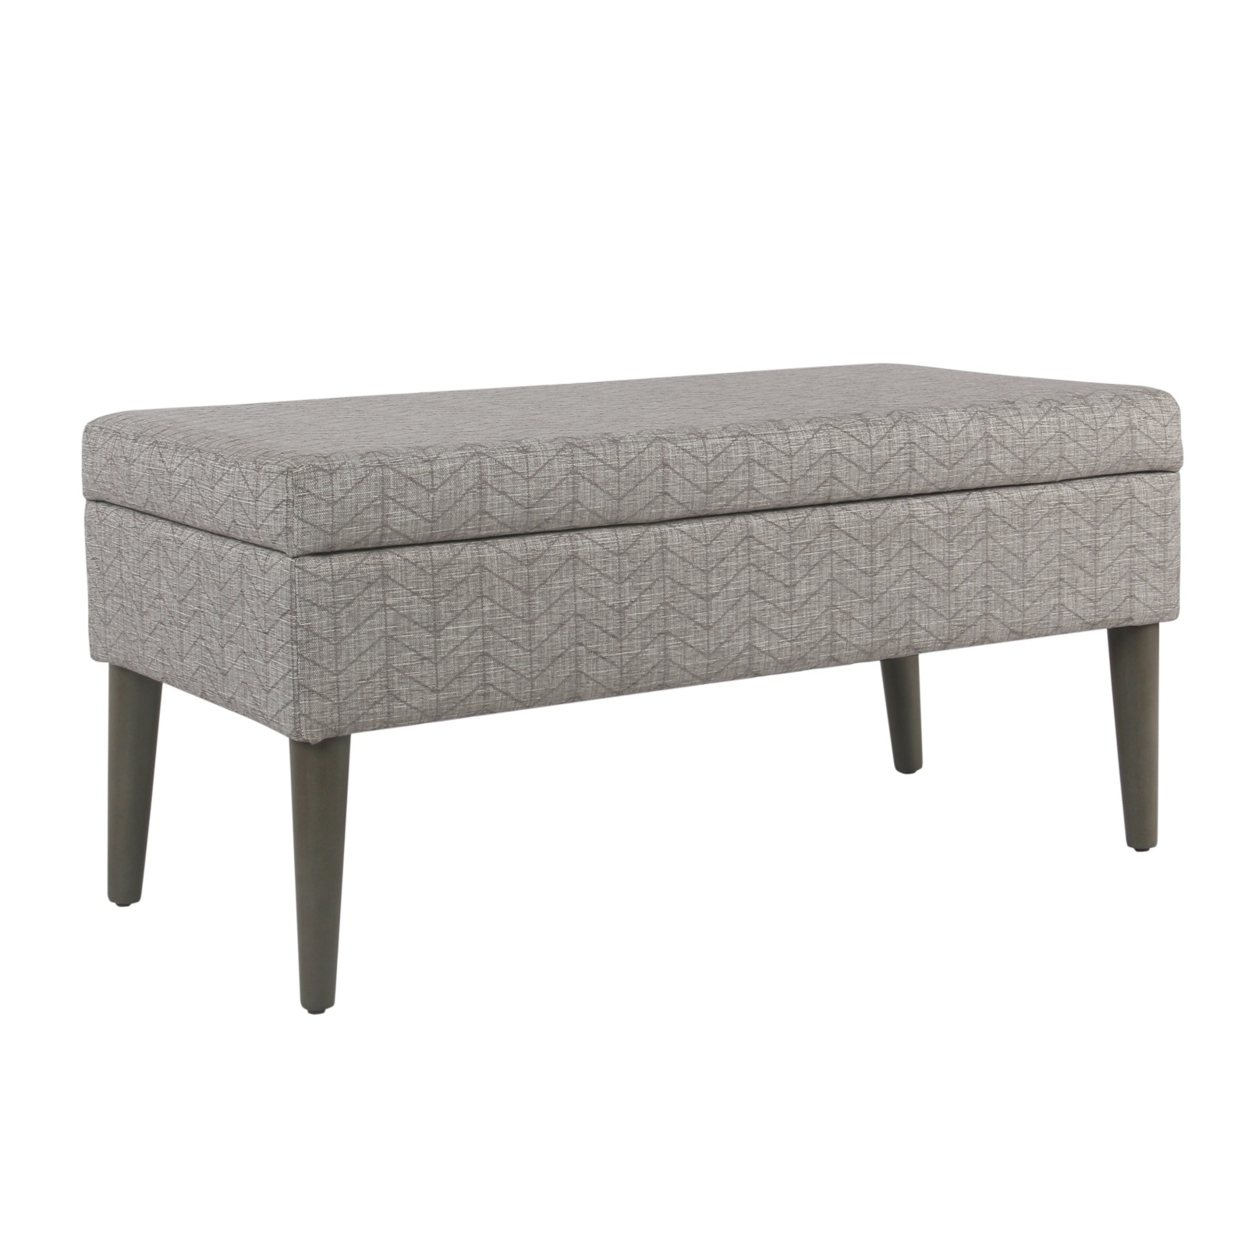 Chevron Patterned Fabric Upholstered Wooden Bench With Lift Top Storage, Gray- Saltoro Sherpi